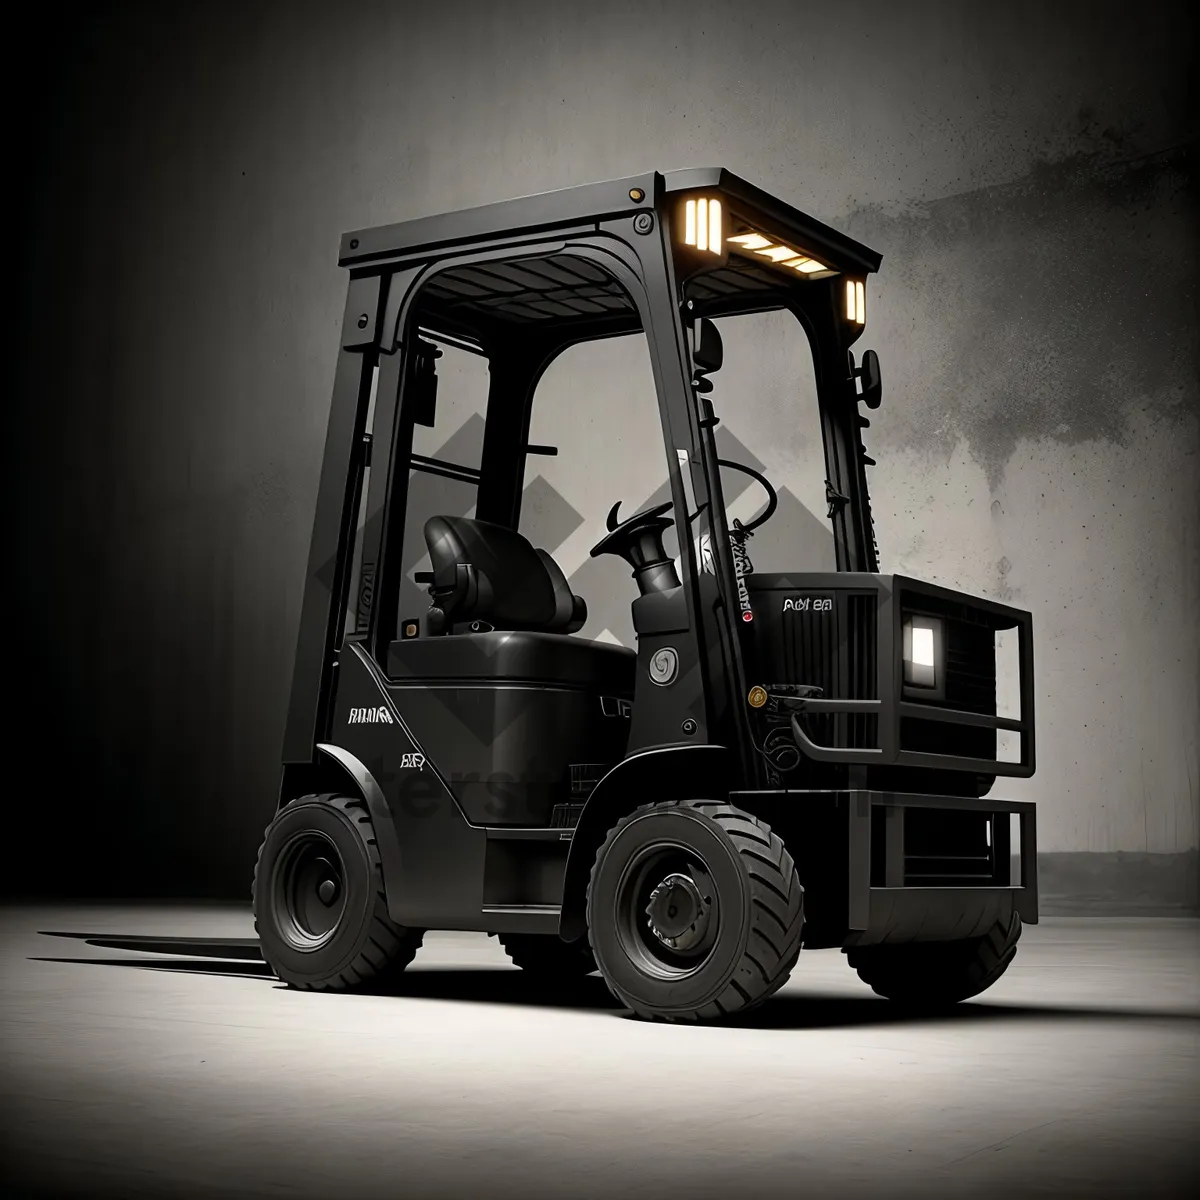 Picture of Heavy-duty Forklift Truck in Industrial Setting